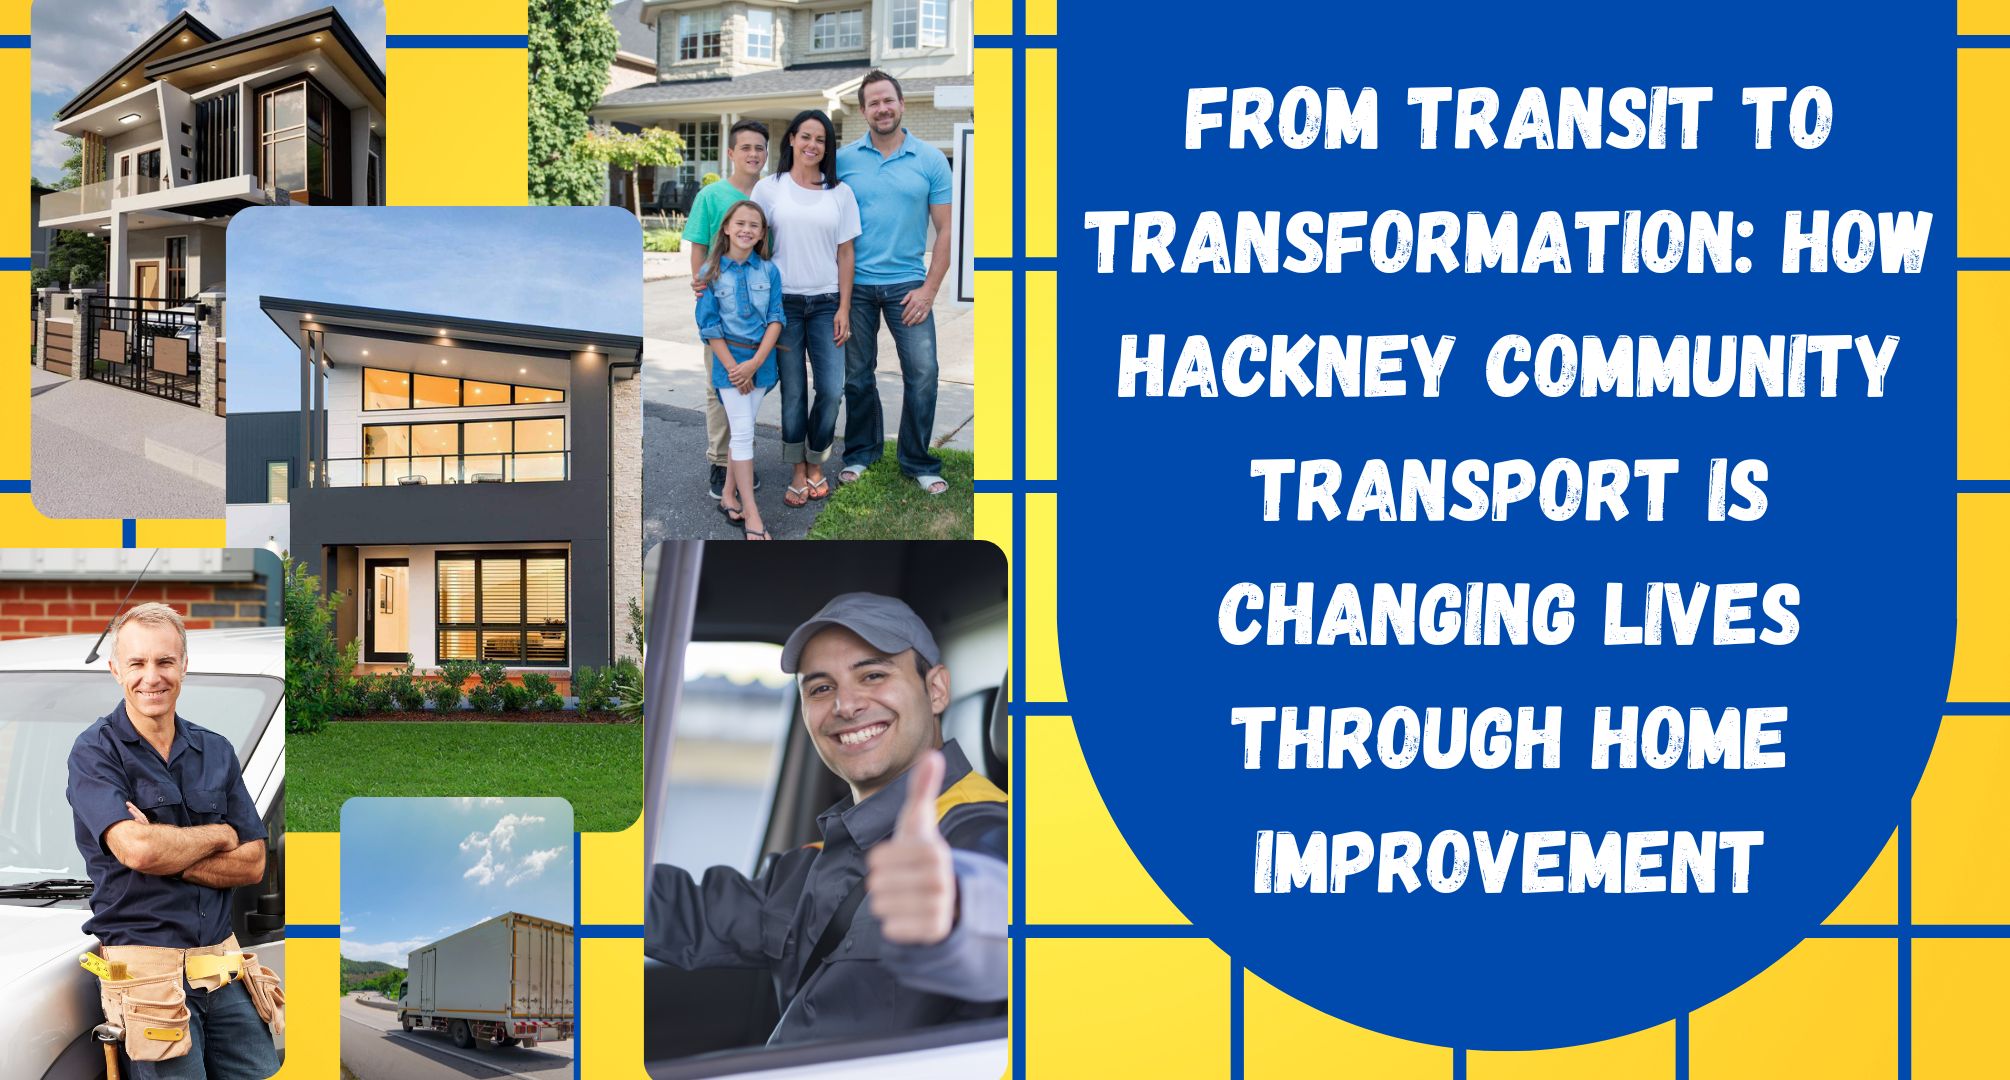 From Transit to Transformation: How Hackney Community Transport is Changing Lives through Home Improvement